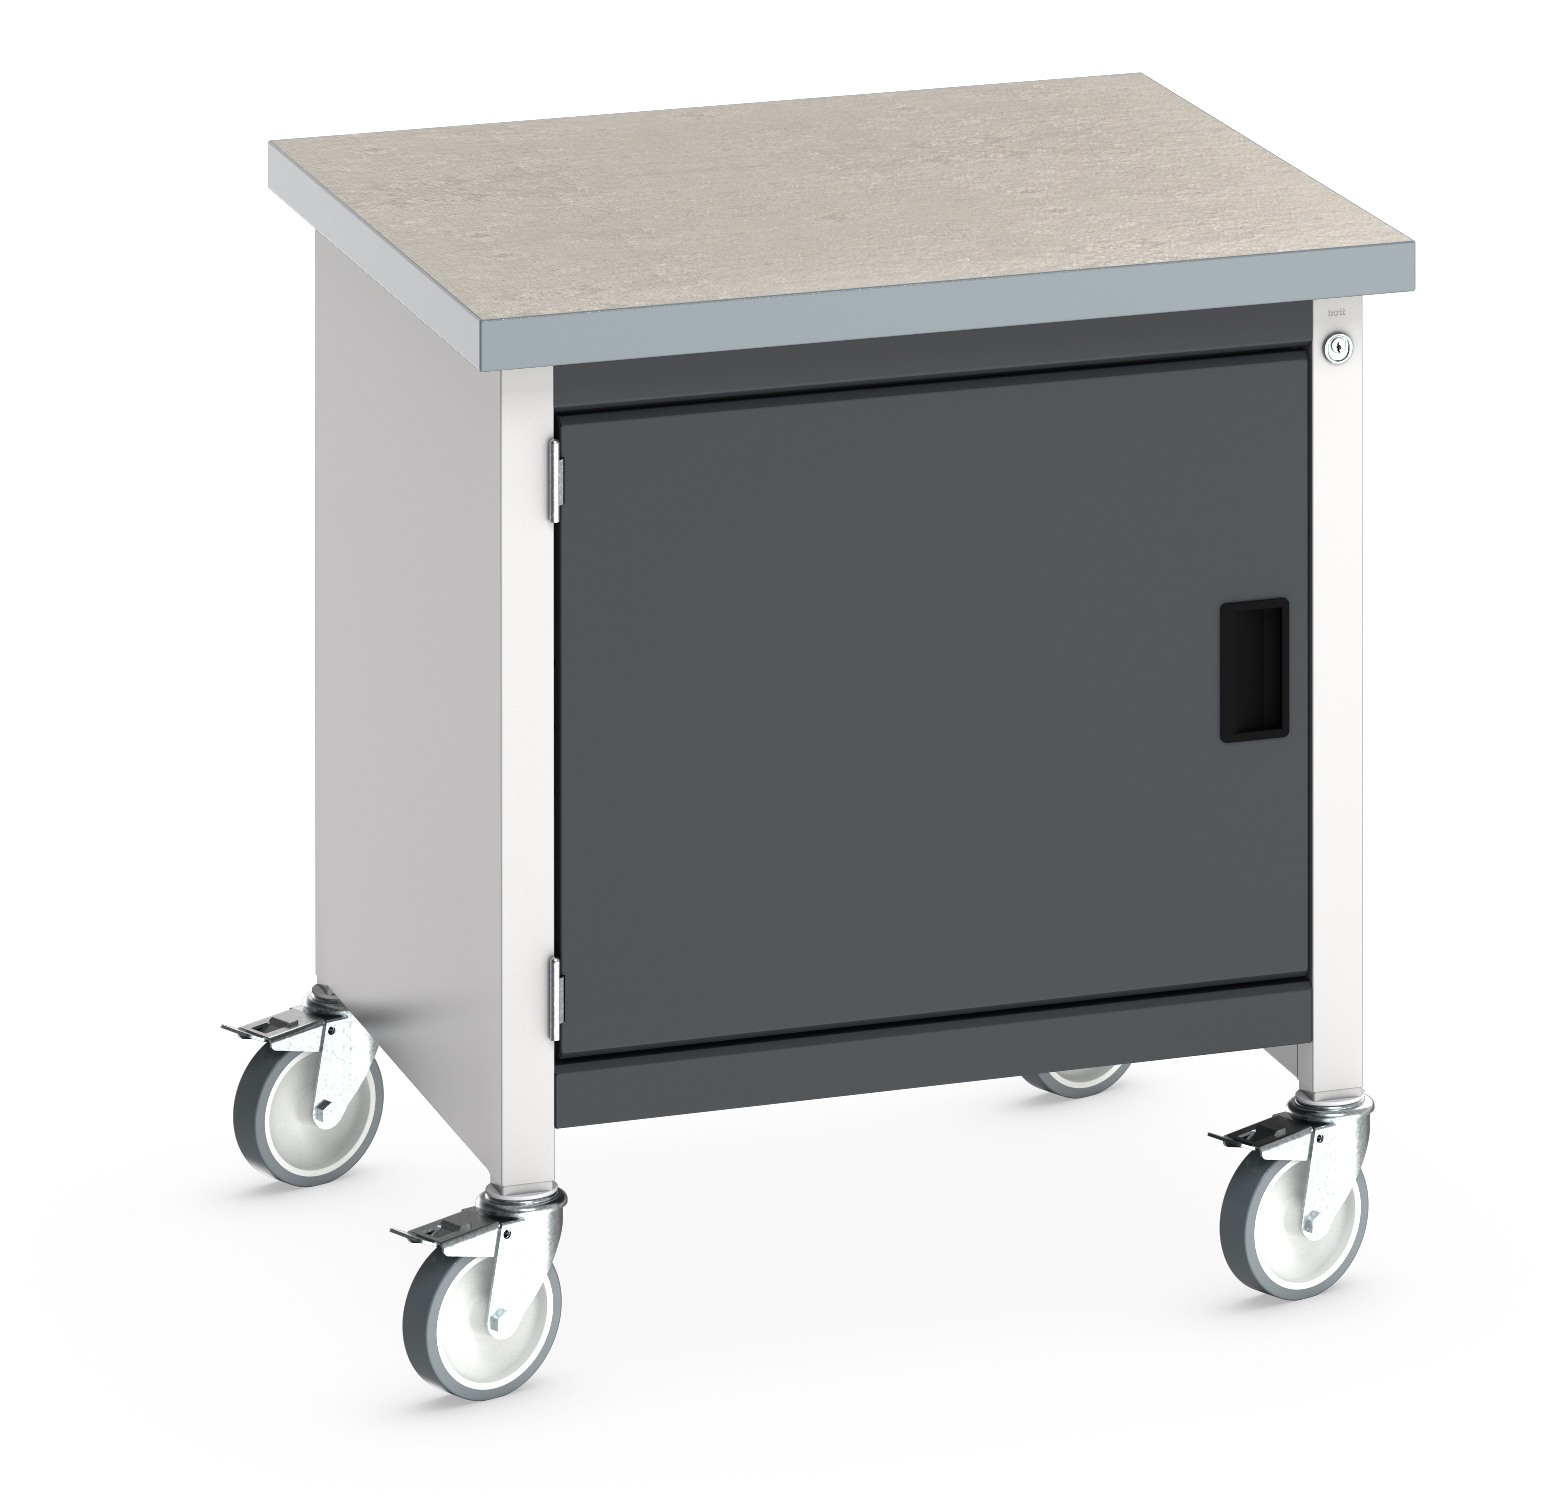 Bott Cubio Mobile Storage Bench With Full Cupboard - 41002087.19V